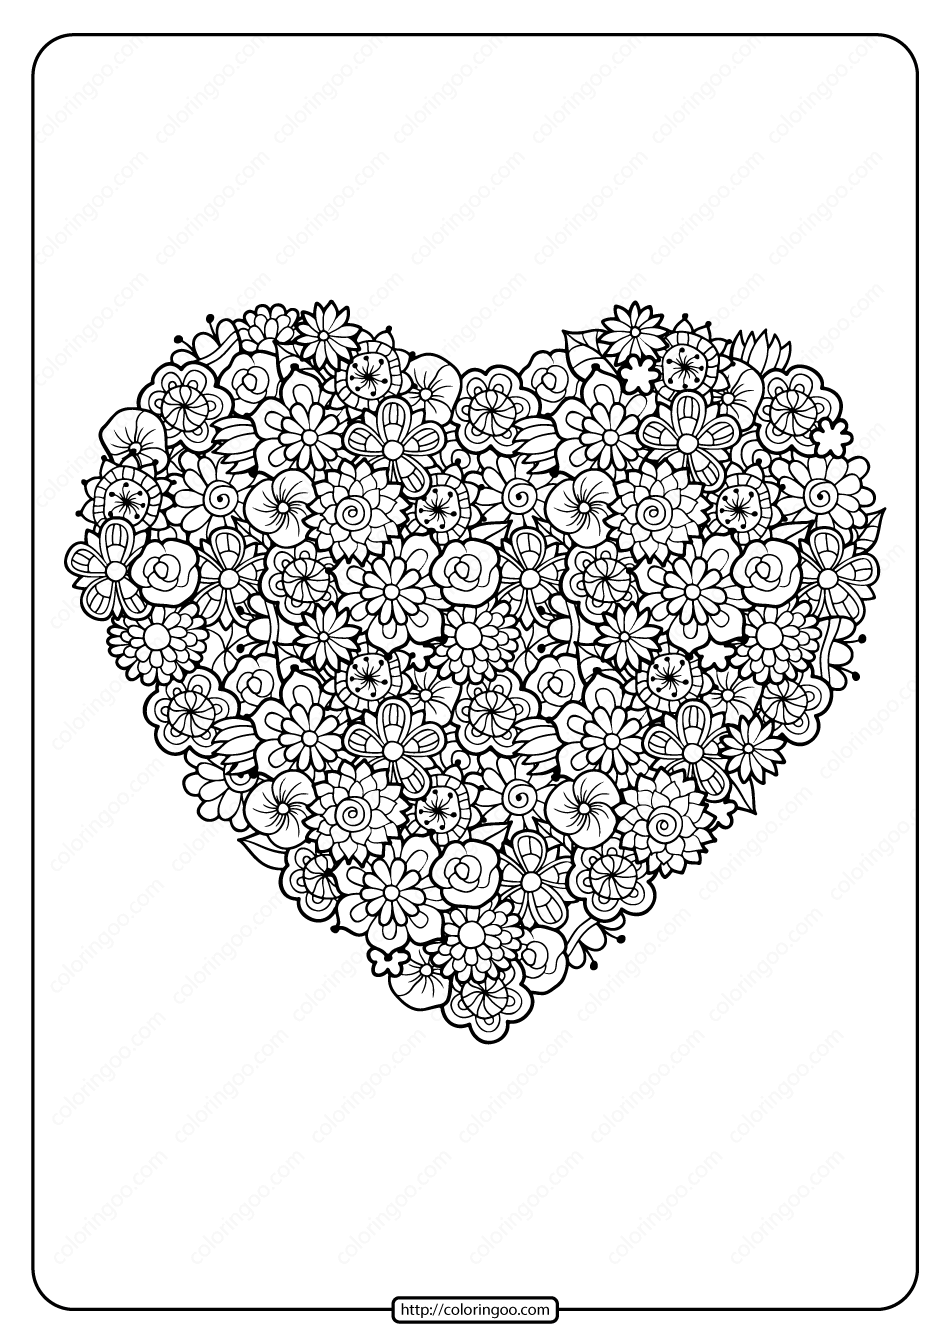 printable floral heart pdf coloring page